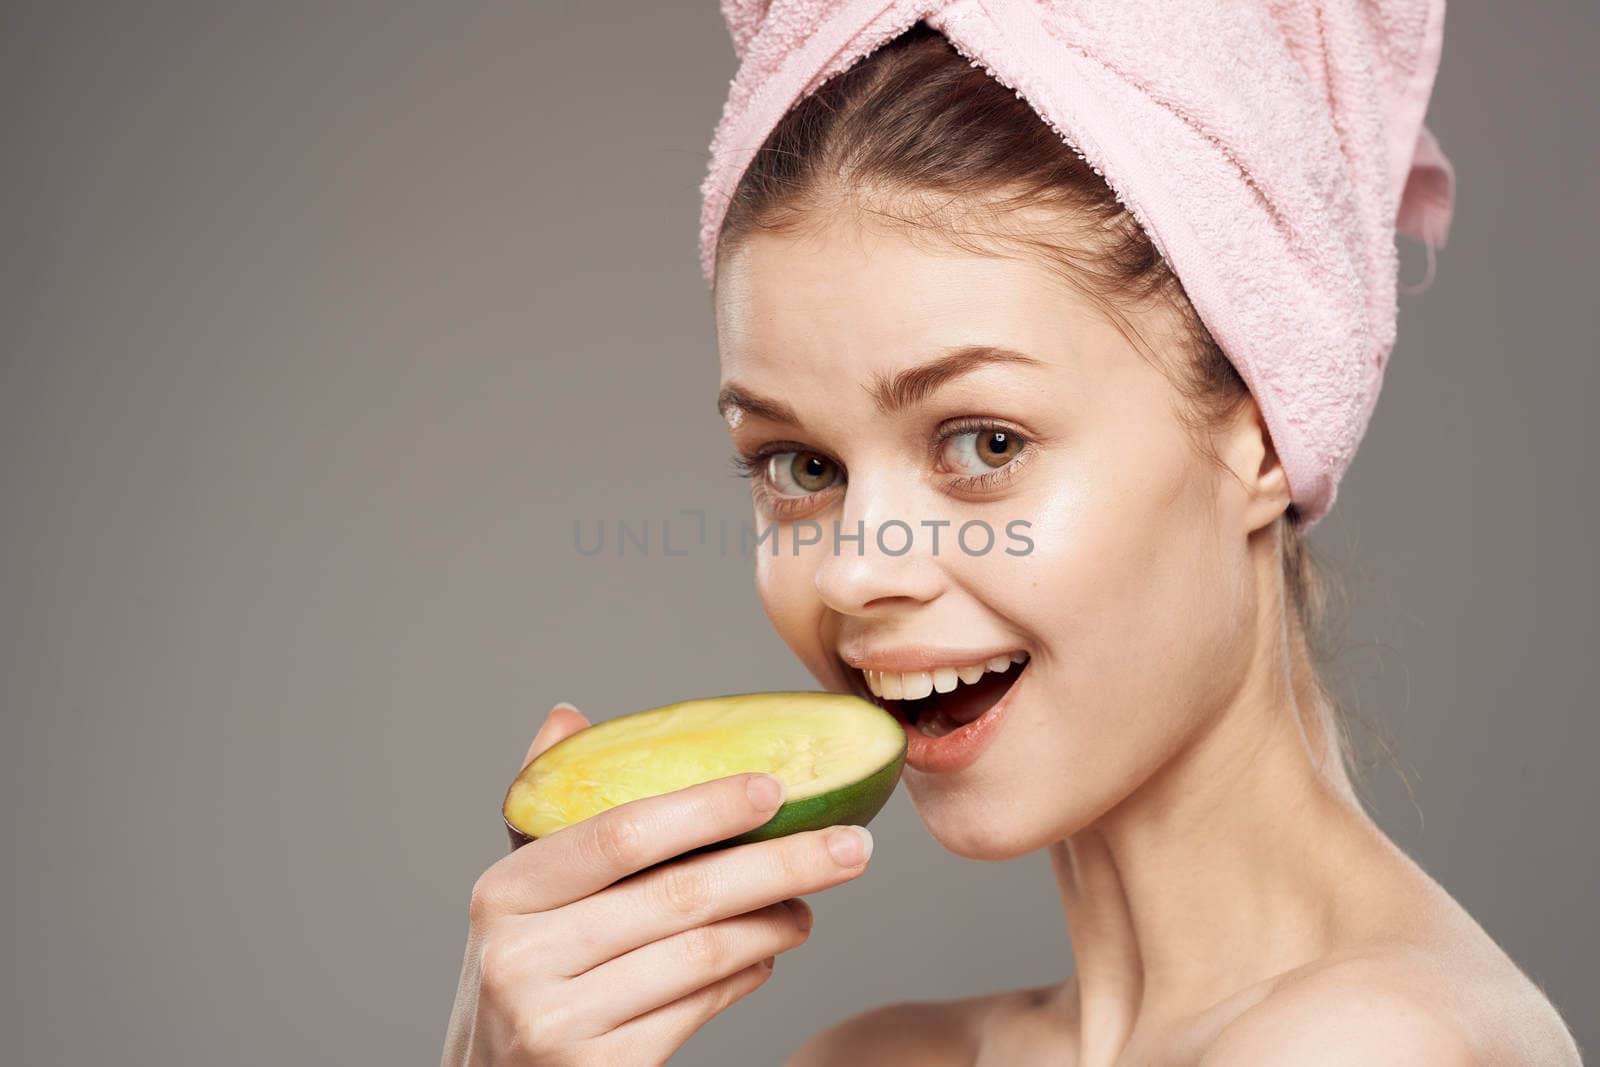 Pretty woman holding a mango in her hand a pink towel on her head close-up. High quality photo